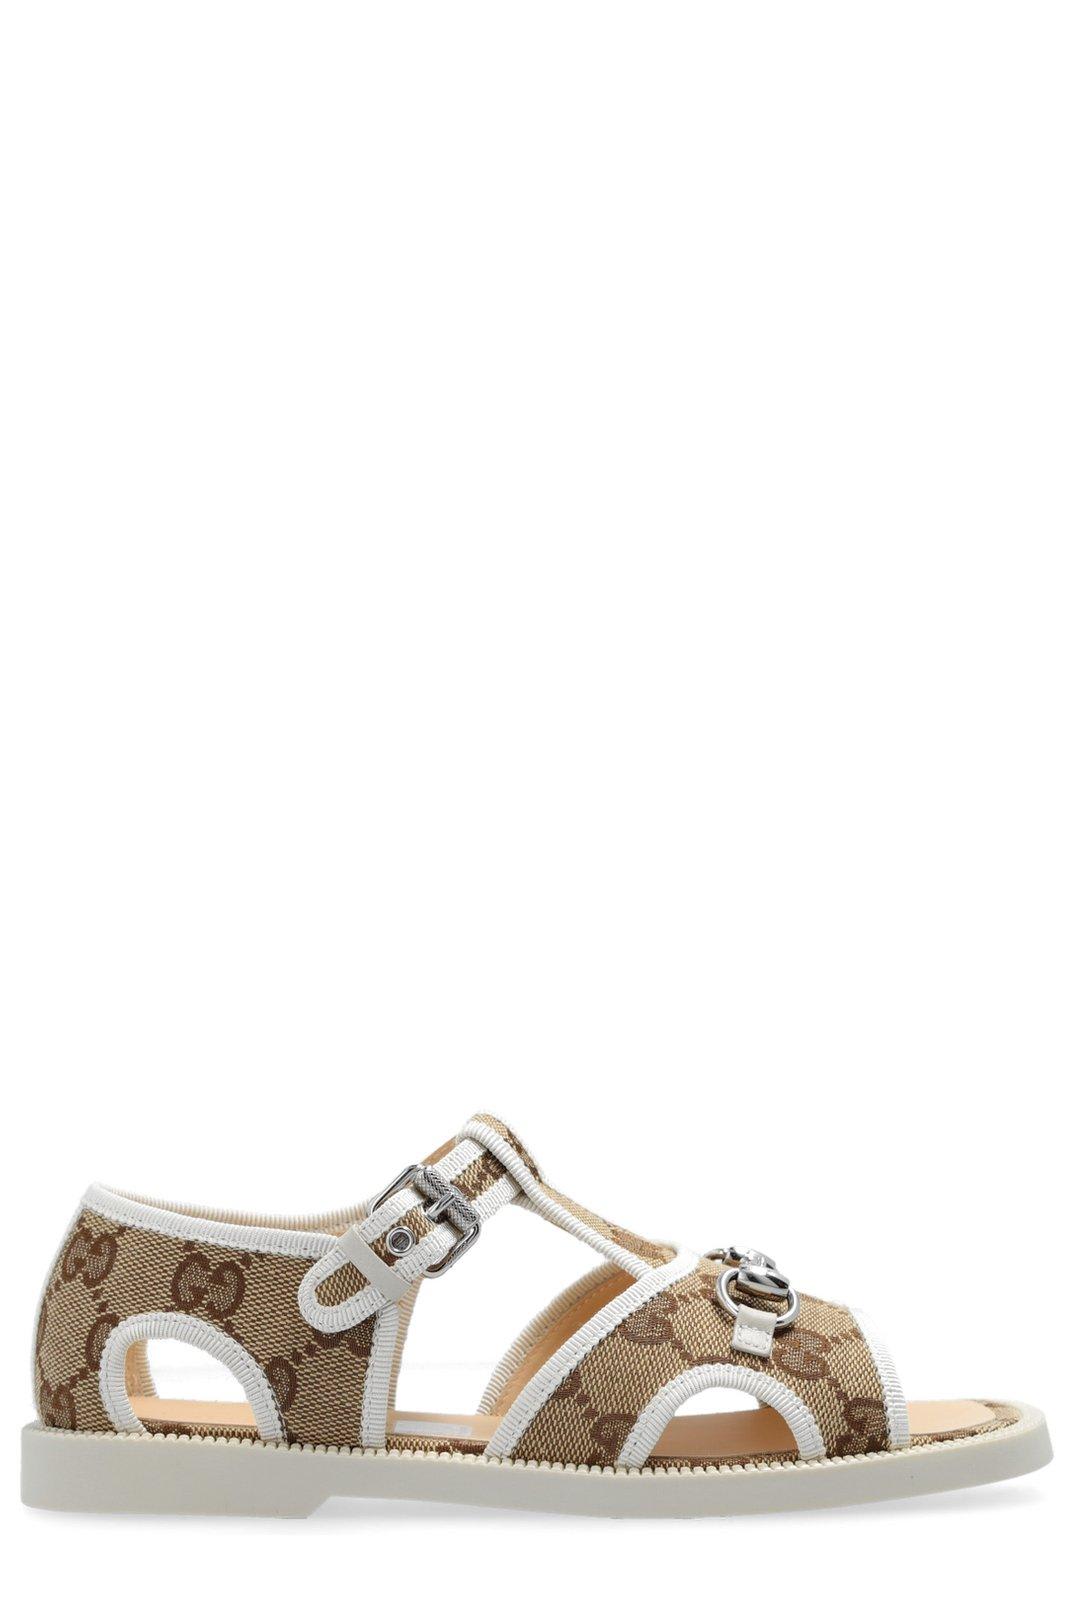 Gucci Buckled Open Toe Sandals